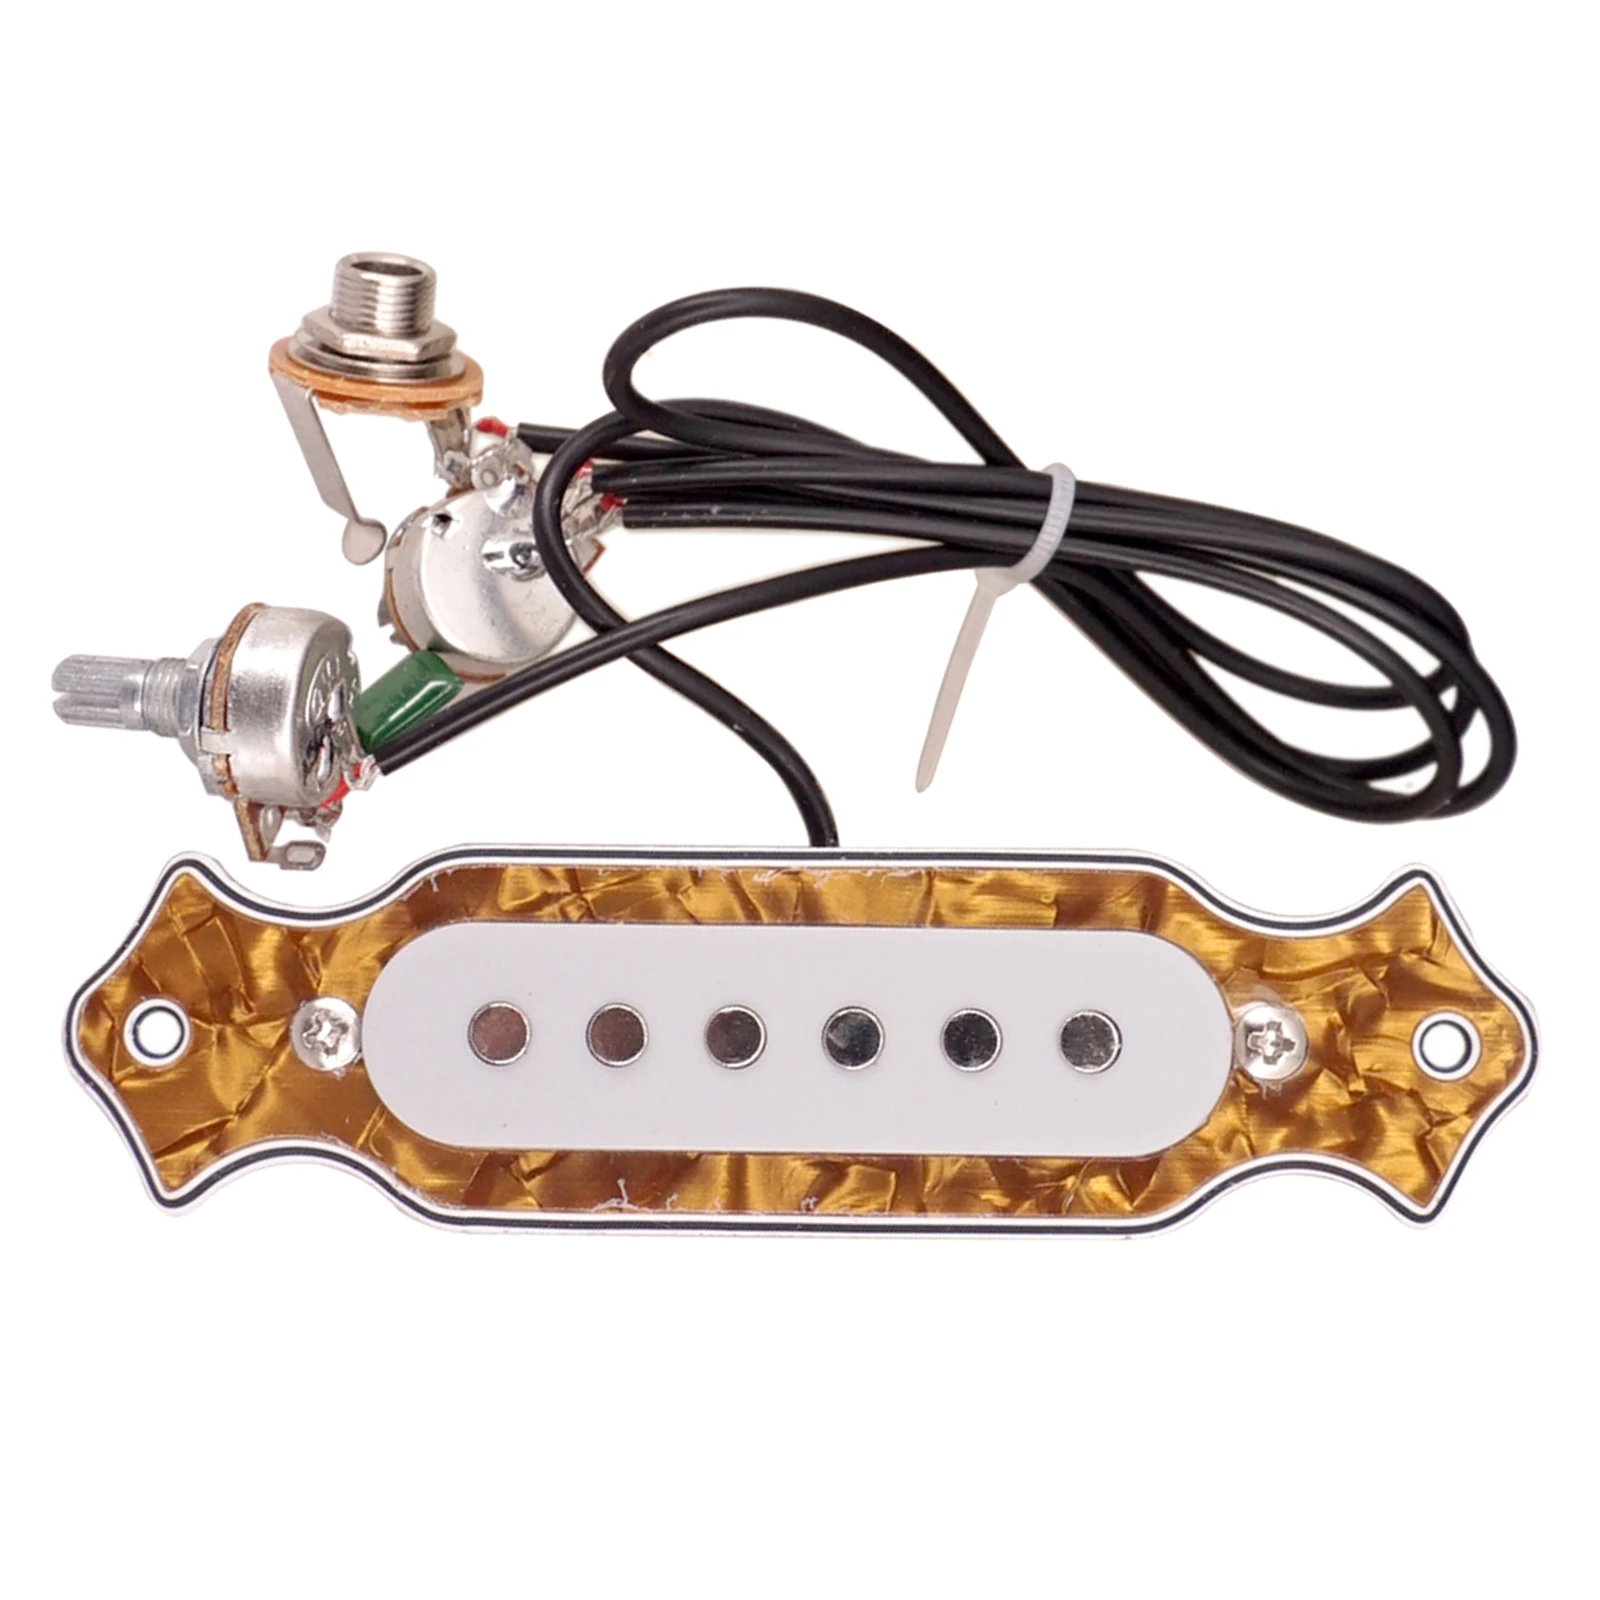 Soundhole Prewired Active Pickup 6 String for Cigar Box Guitar Parts Accessories